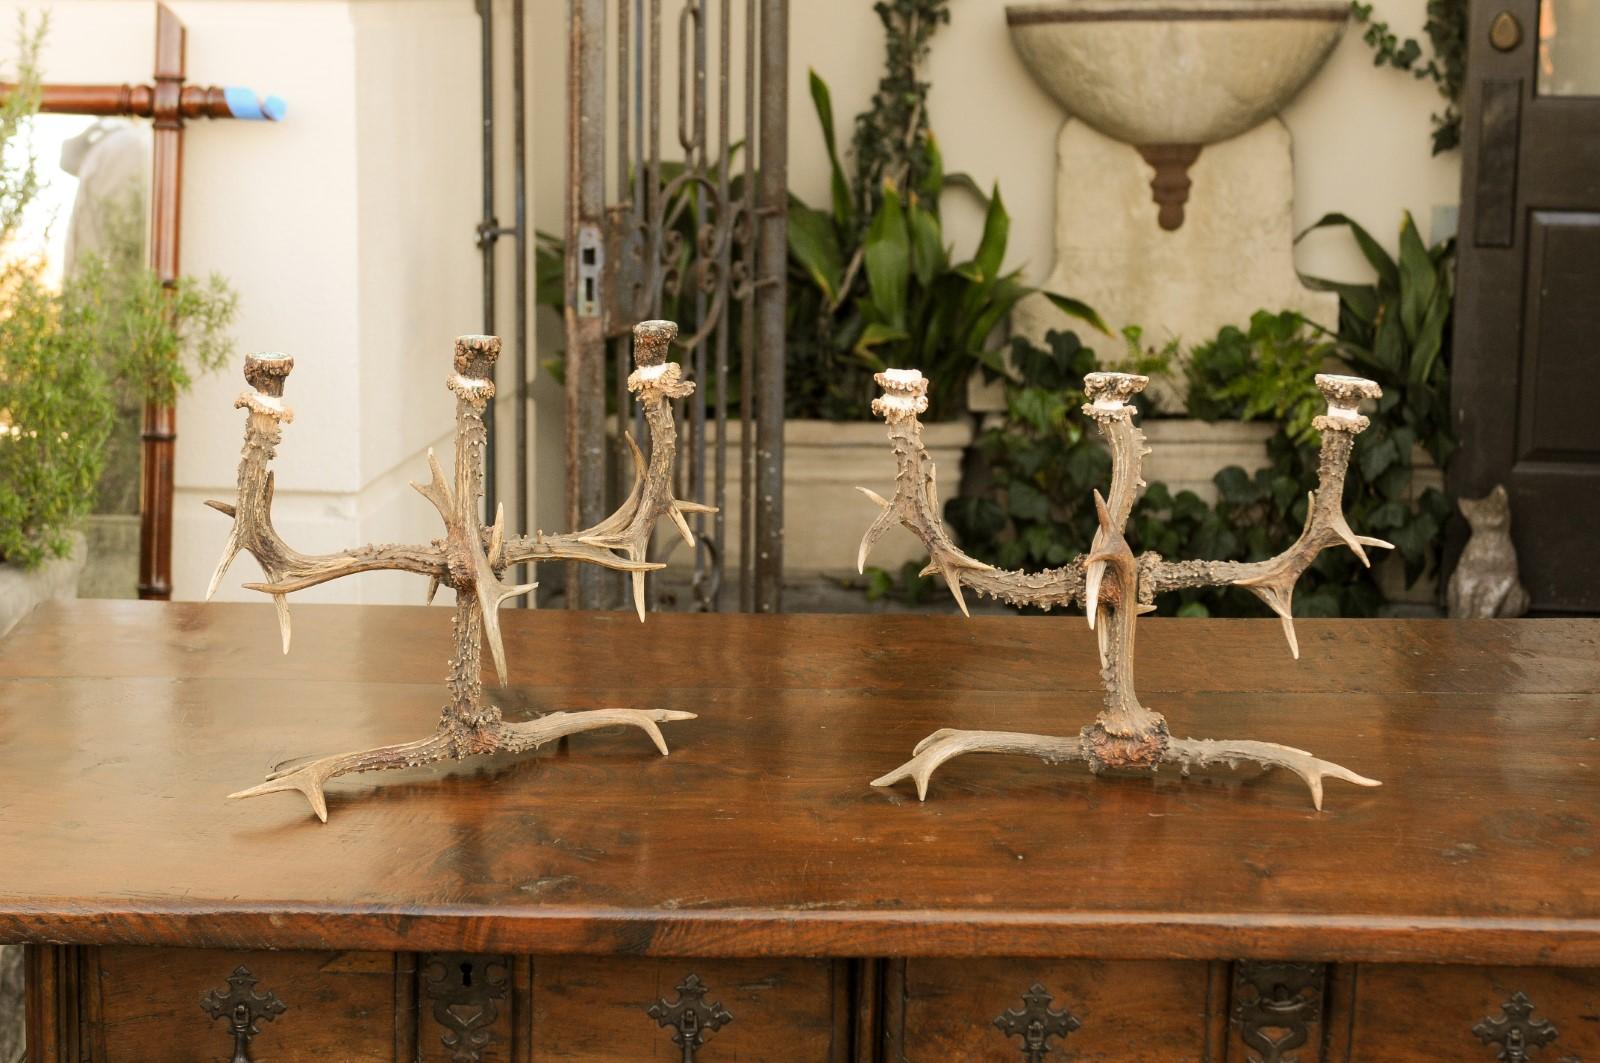 This pair of English rustic antler three-arm candelabra, dating from the 1940s, showcases the enchanting allure of countryside elegance and traditional craftsmanship. Each candelabrum is artfully composed of natural antlers, thoughtfully arranged to